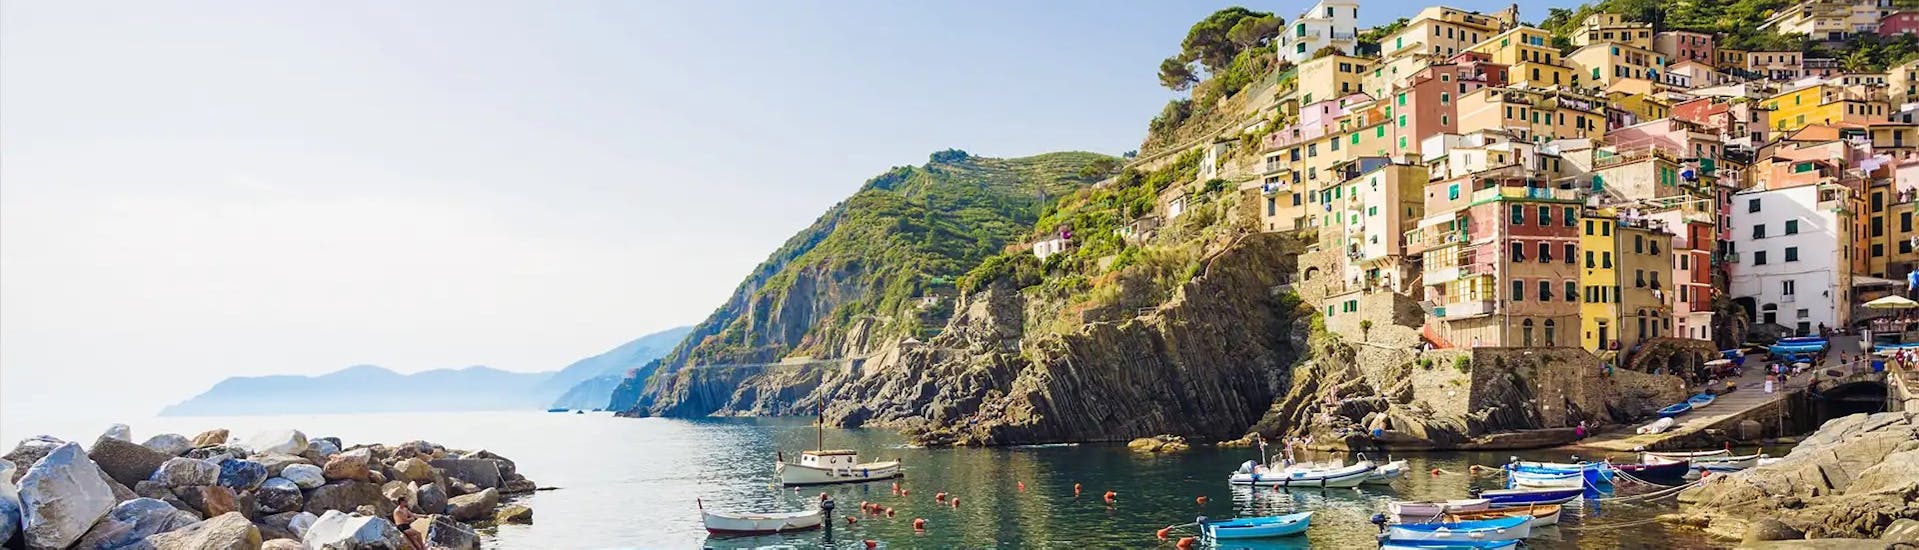 The view you can admire during the Boat Trip from La Spezia to Cinque Terre, Porto Venere & Lord Byron's Grotto with 5 Terre Boat Experience.